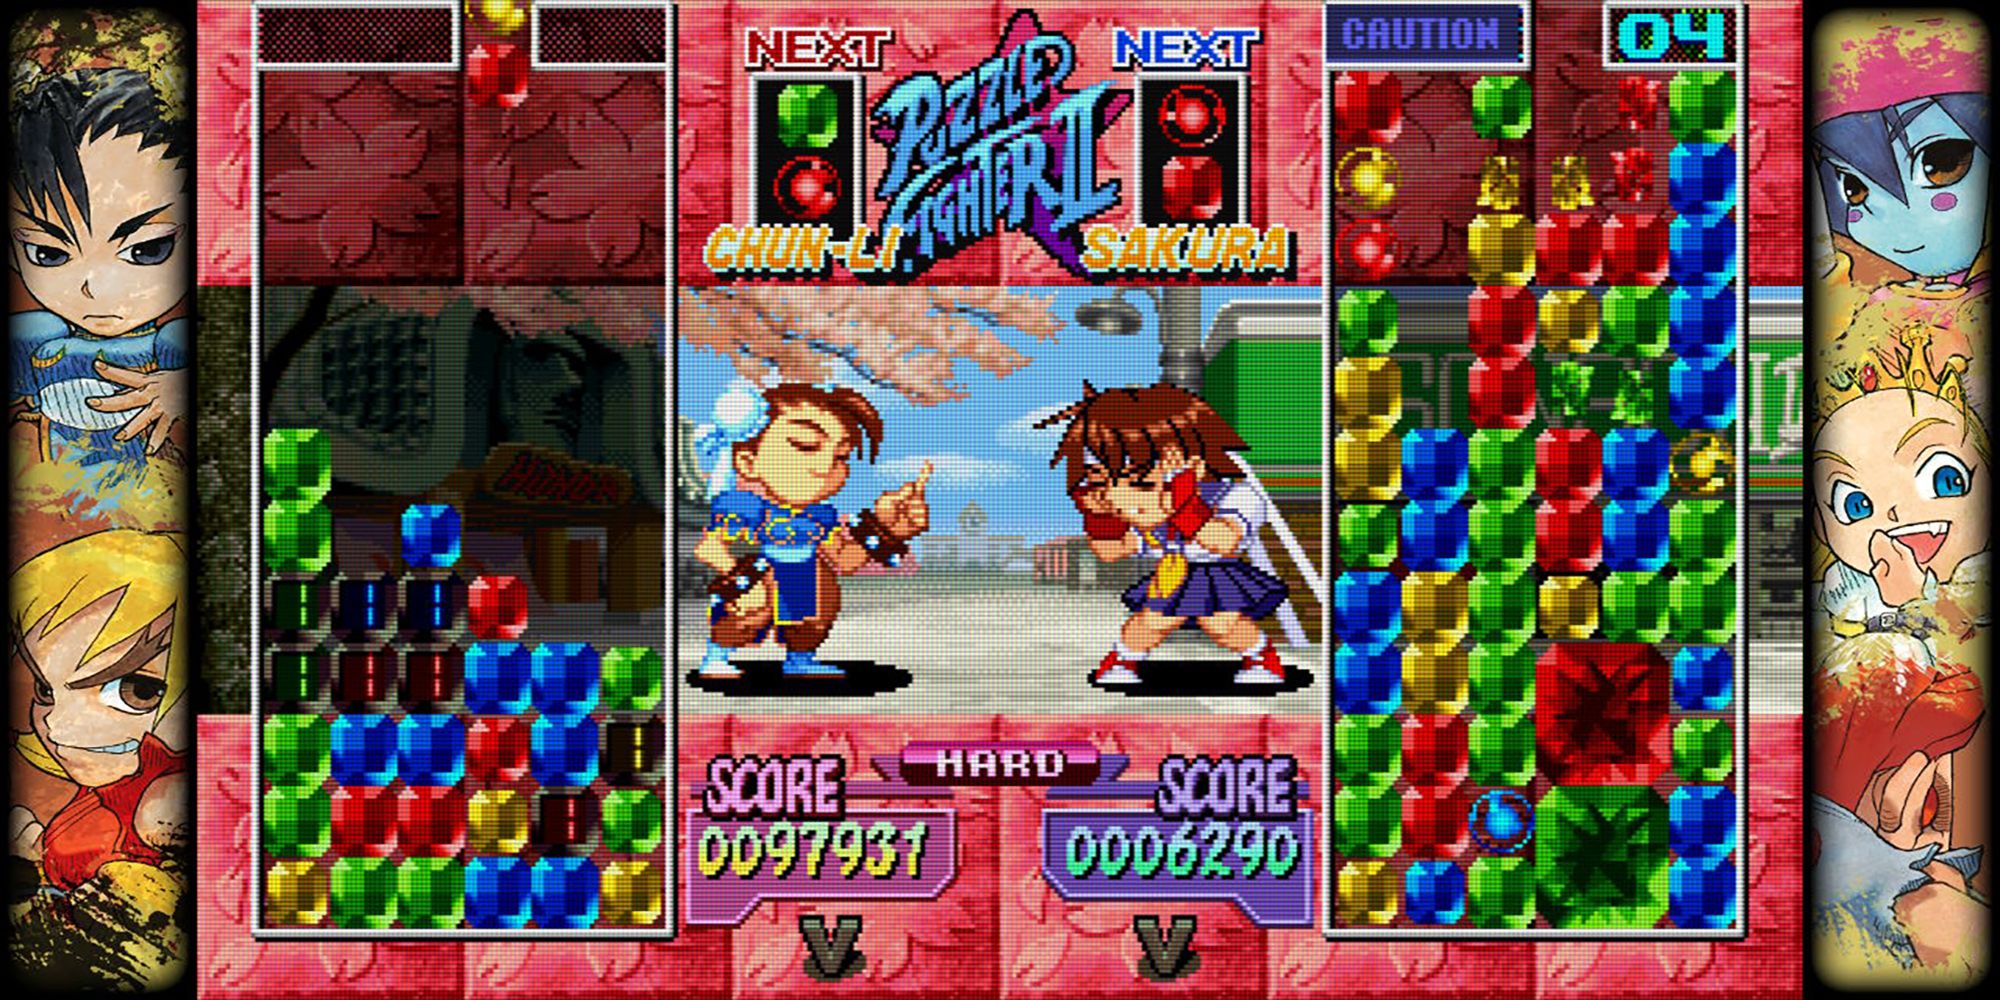 Chun-li overwhelms Sakura using simple attacks during a battle in a shopping center in Super Puzzle Fighter 2 Turbo, a game in Capcom Fighting Collection.